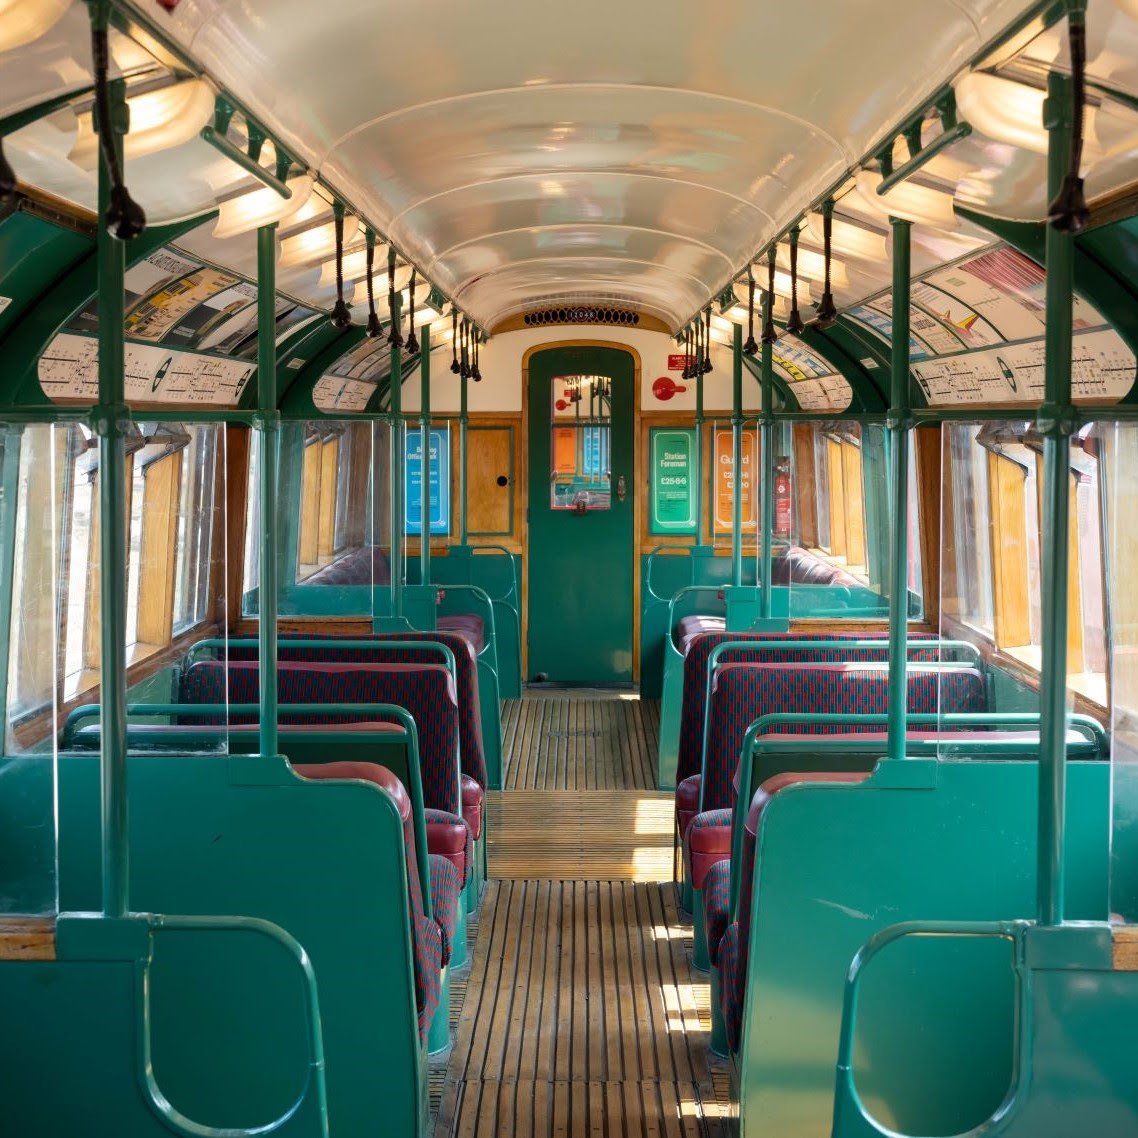 View of the interior of a heritage train carriage